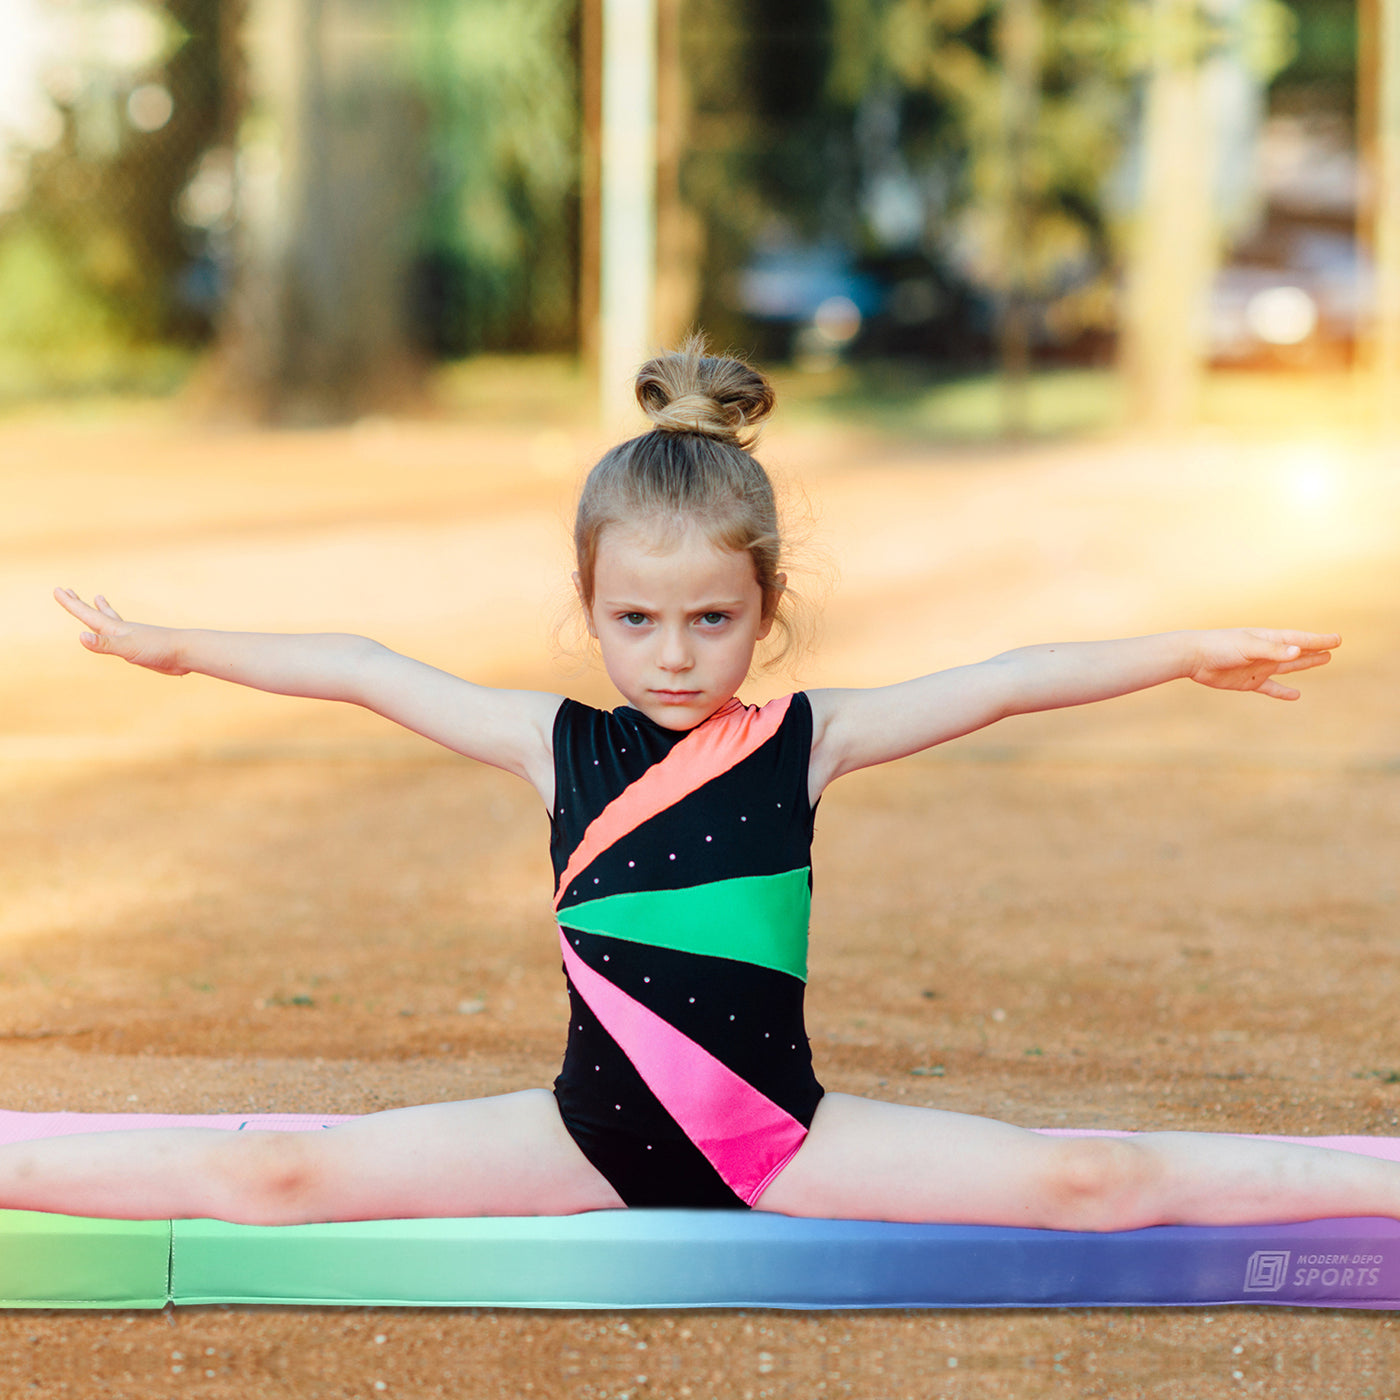 Gymnastics Balance Beam 6 Ft / 8 Ft / 9.5 Ft for Home Use | Physical Therapy, Rehabilitation and Core Strength Training Foam Folding Floor Beam for Girls, Boys, Teens, Beginners & Professional Gymnasts